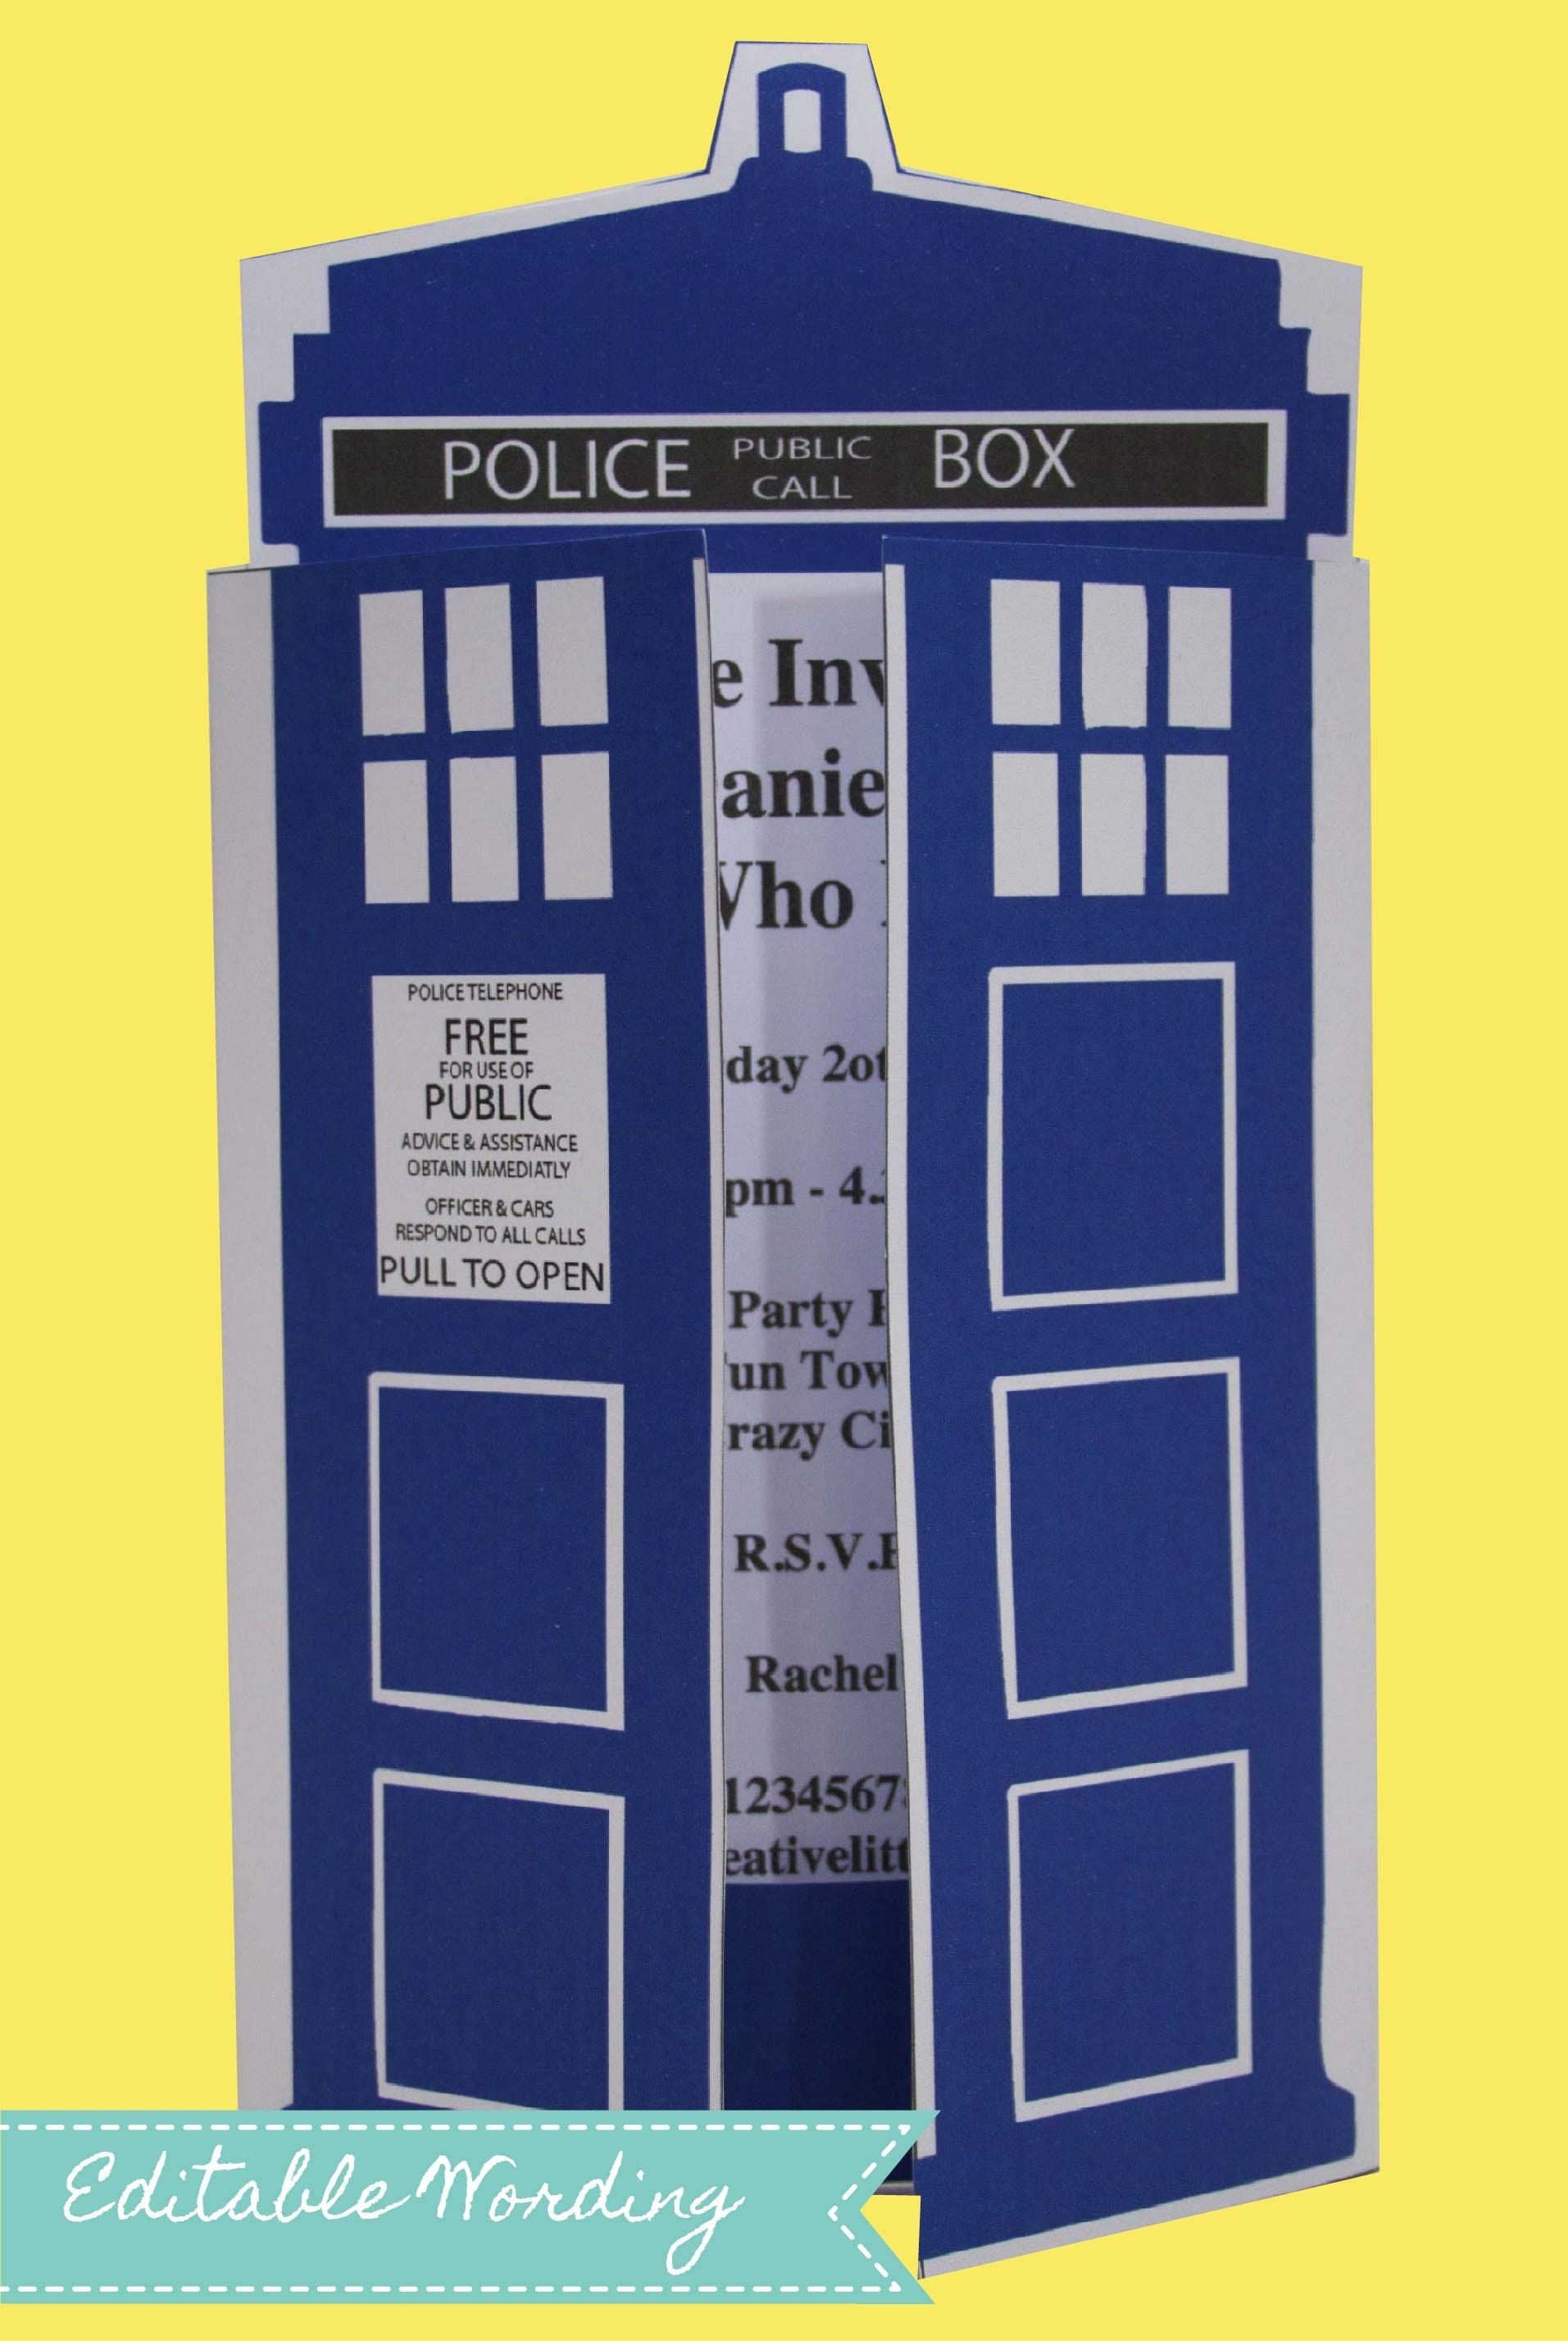 Print Yourself Invites. $8.00 Perfect Any Dr Who Fan #drwho - Doctor Who Party Invitations Printable Free